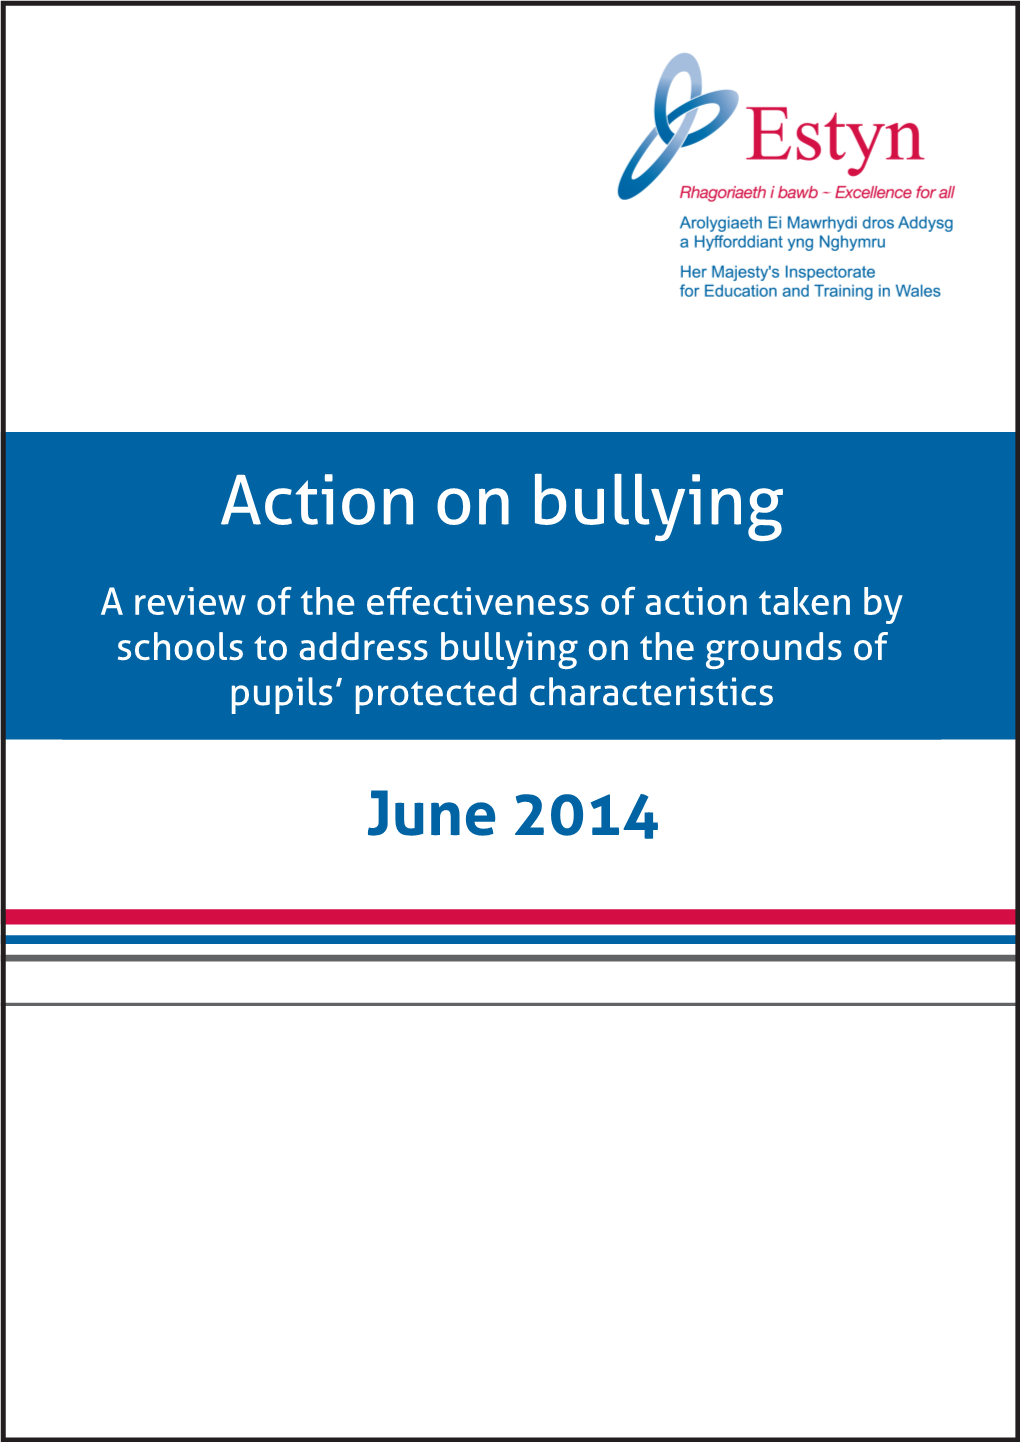 Action on Bullying